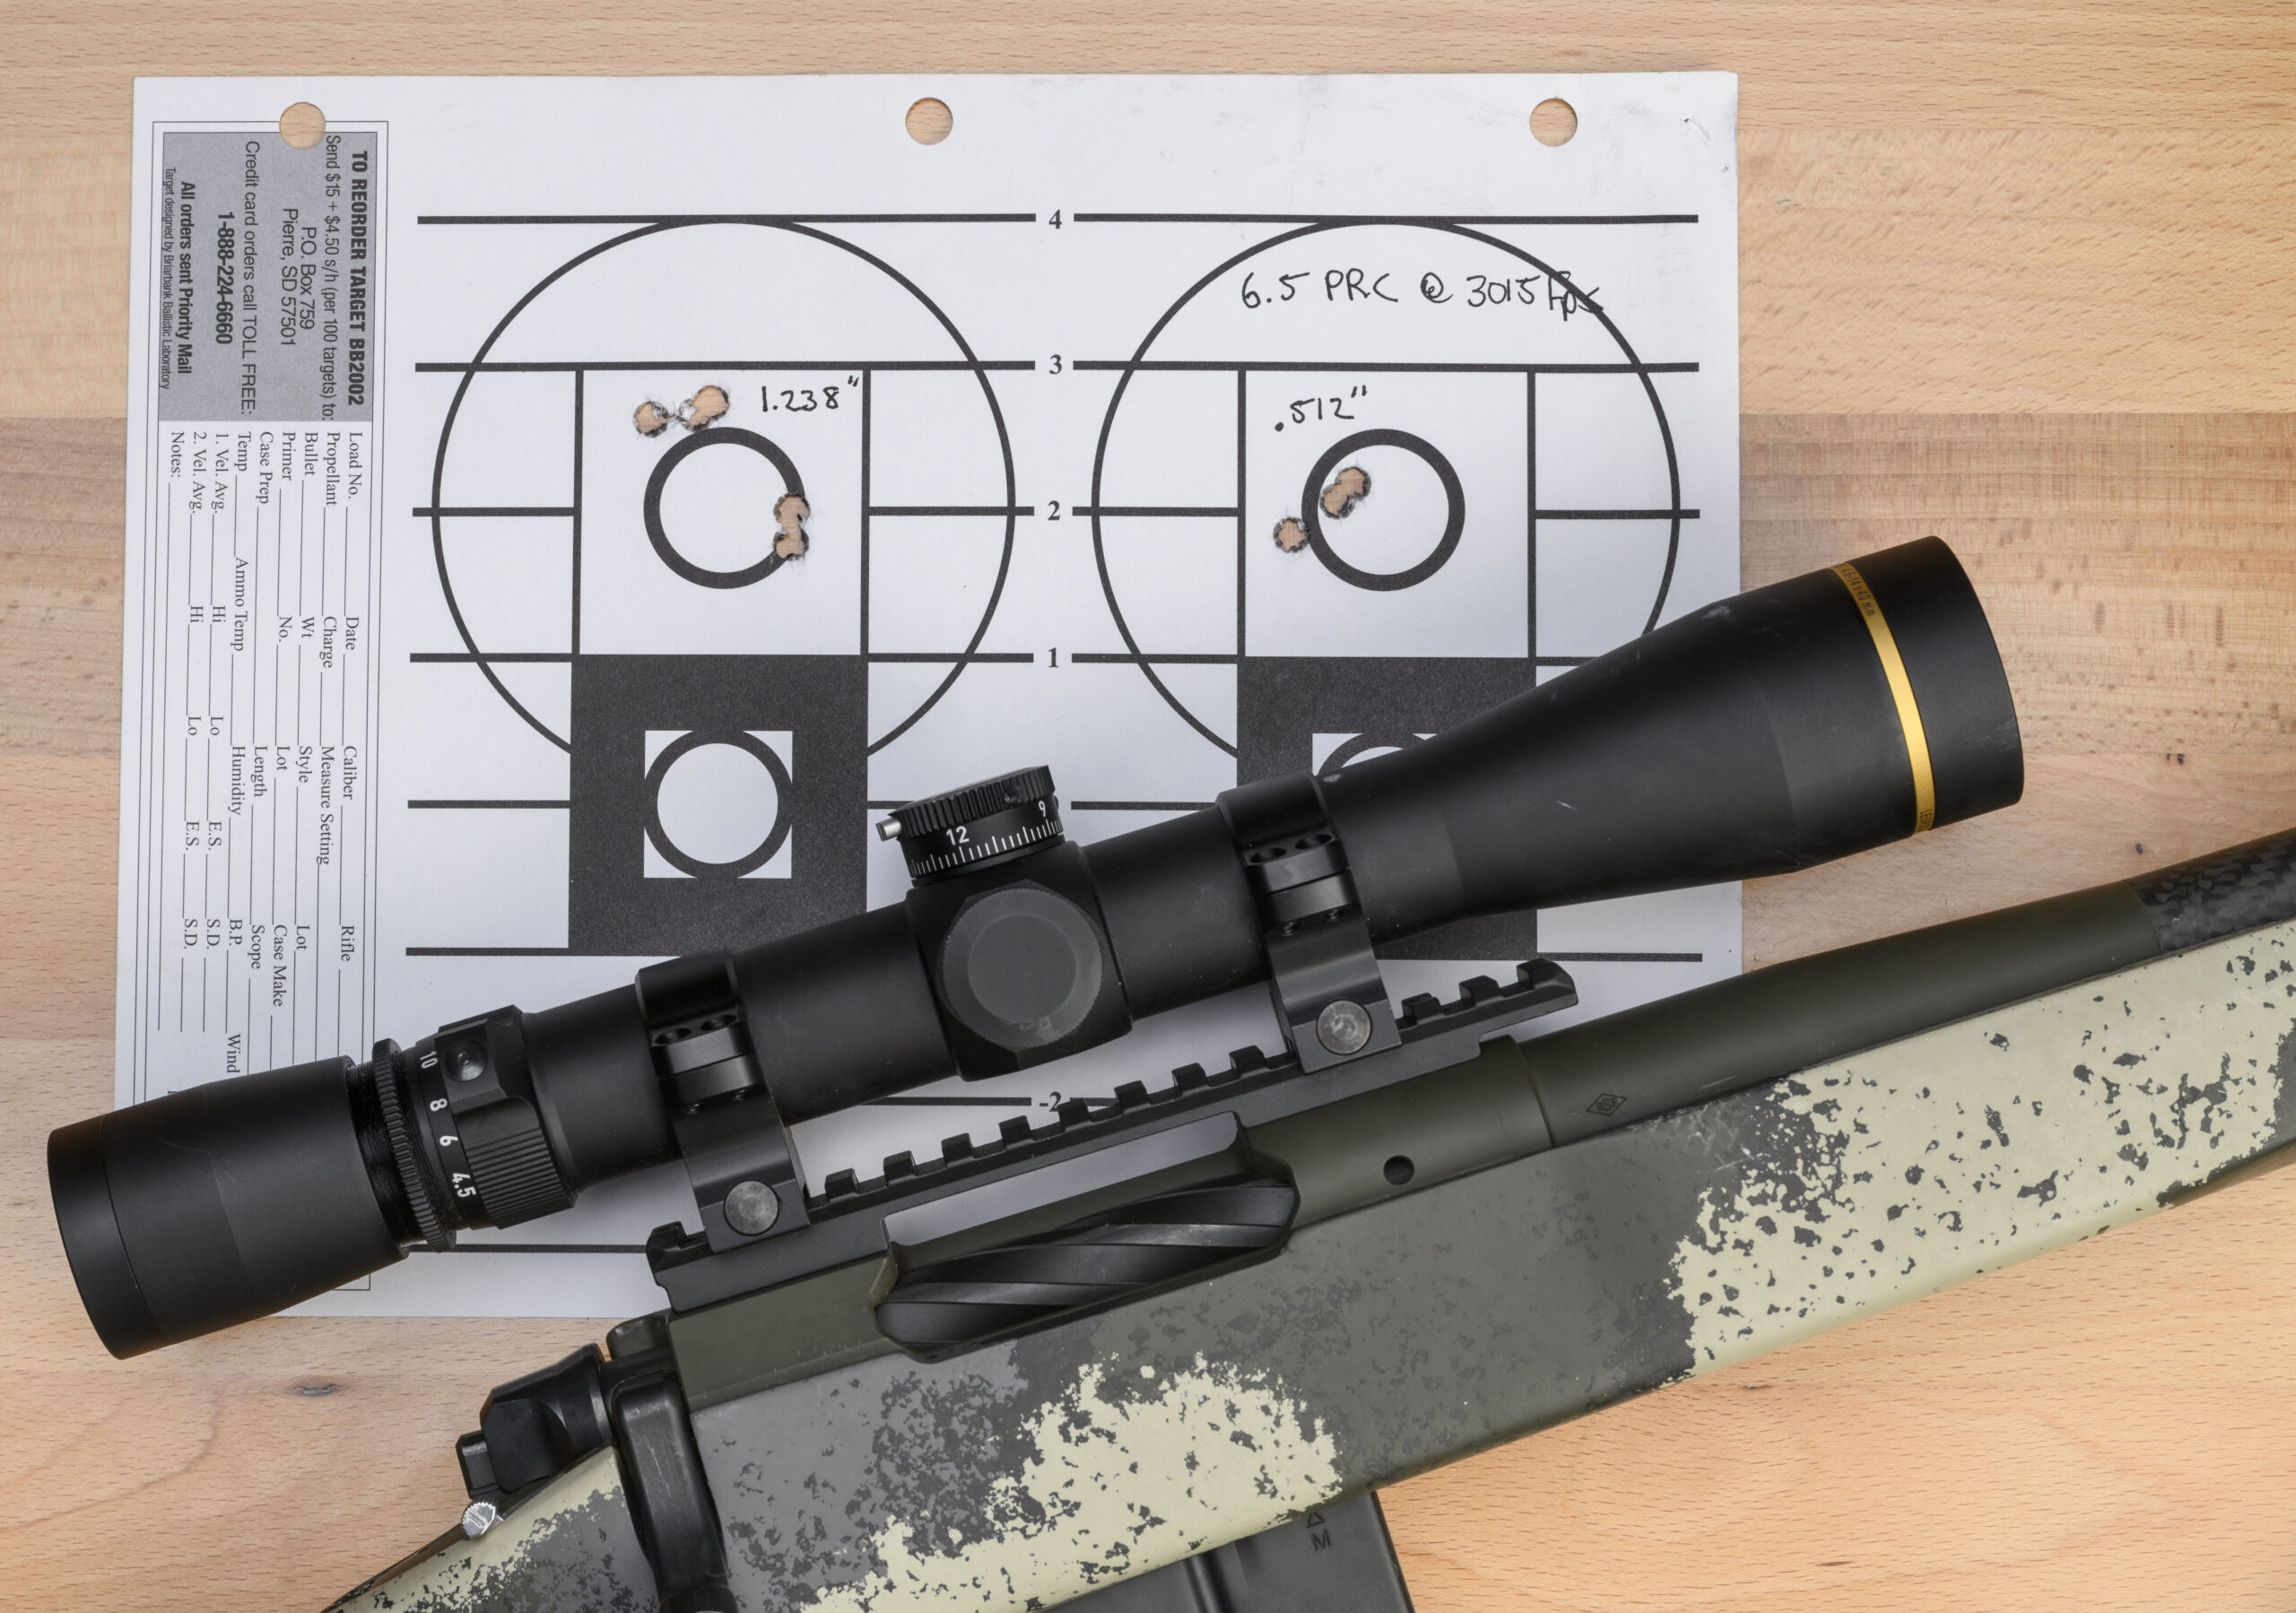 A camo-stocked, scope-topped camo rifle lying on a shot paper target on a wooden table.